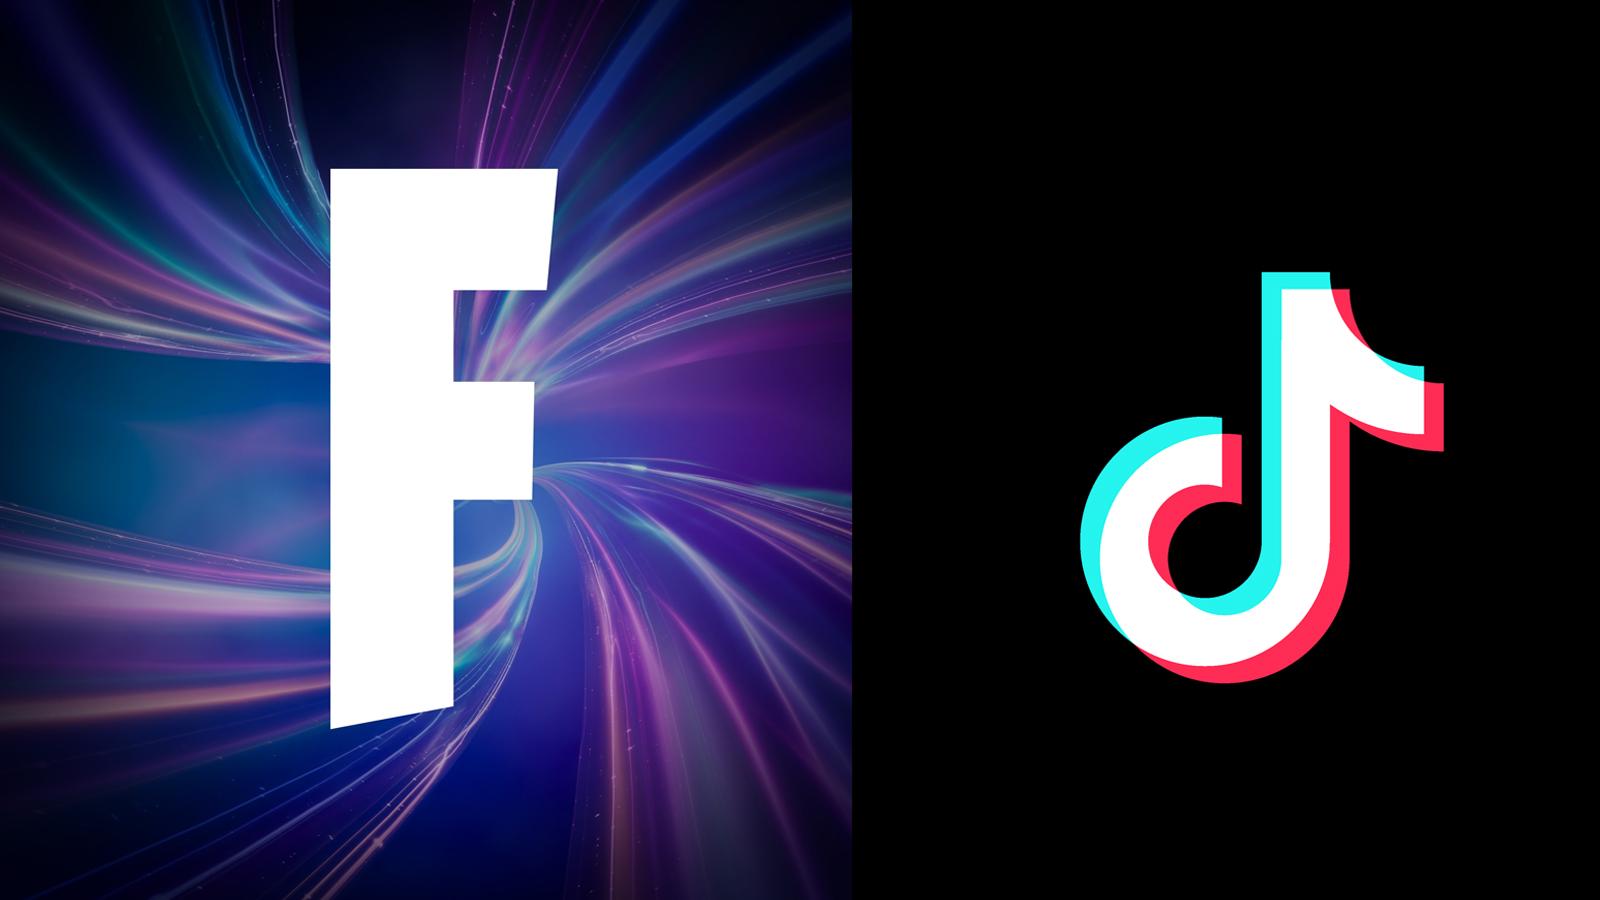 The Fortnite and TikTok logos side by side